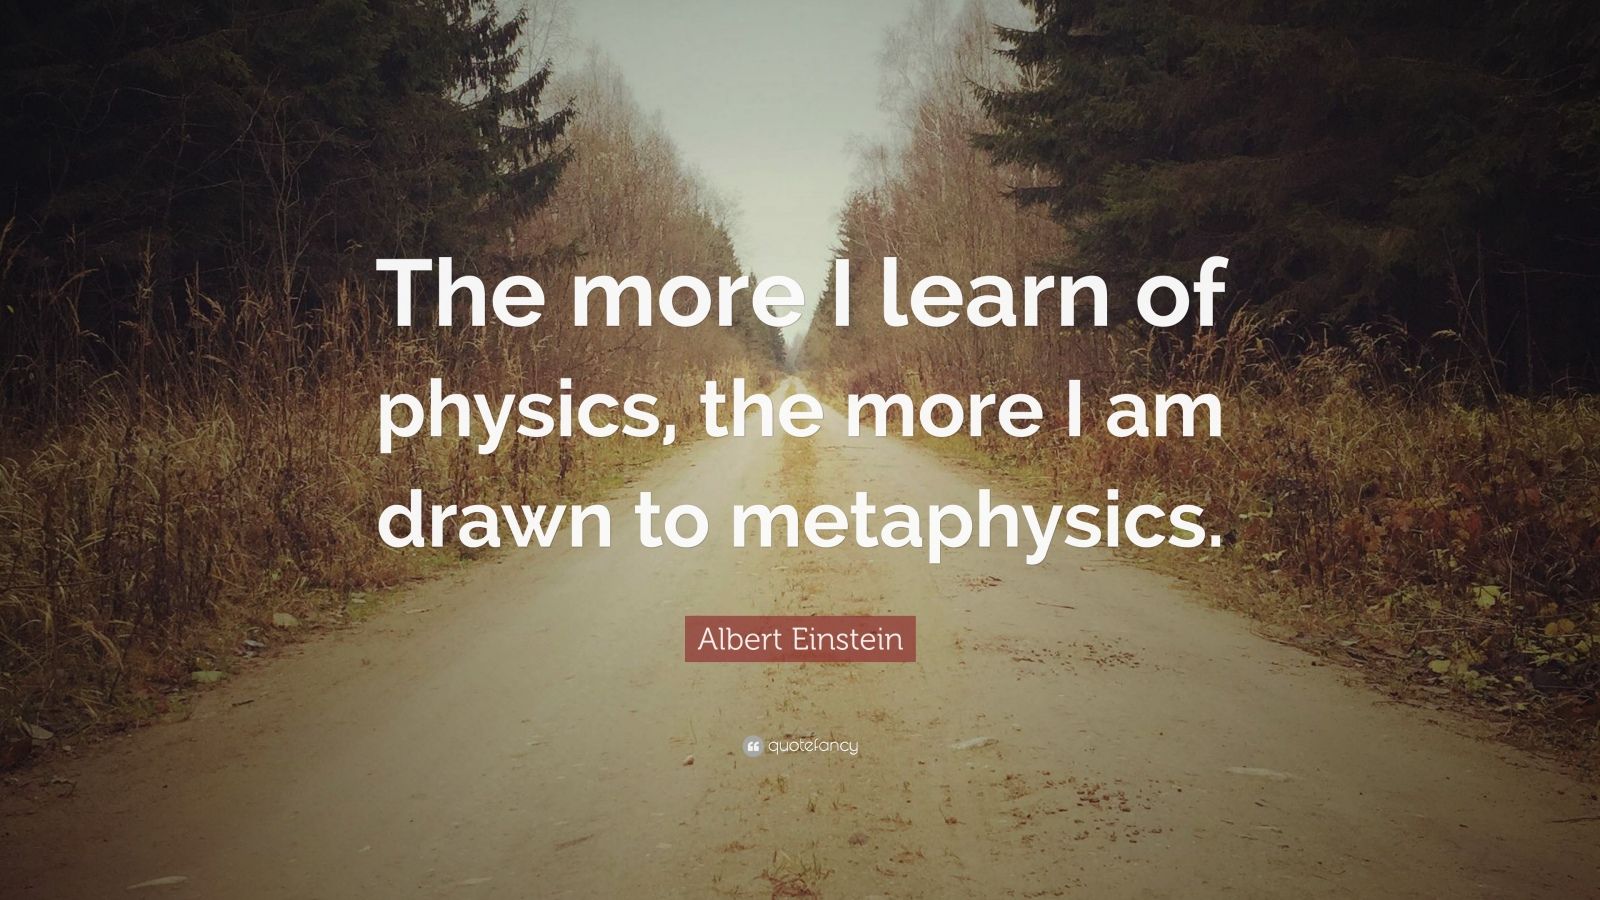 Albert Einstein Quote: “The more I learn of physics, the more I am